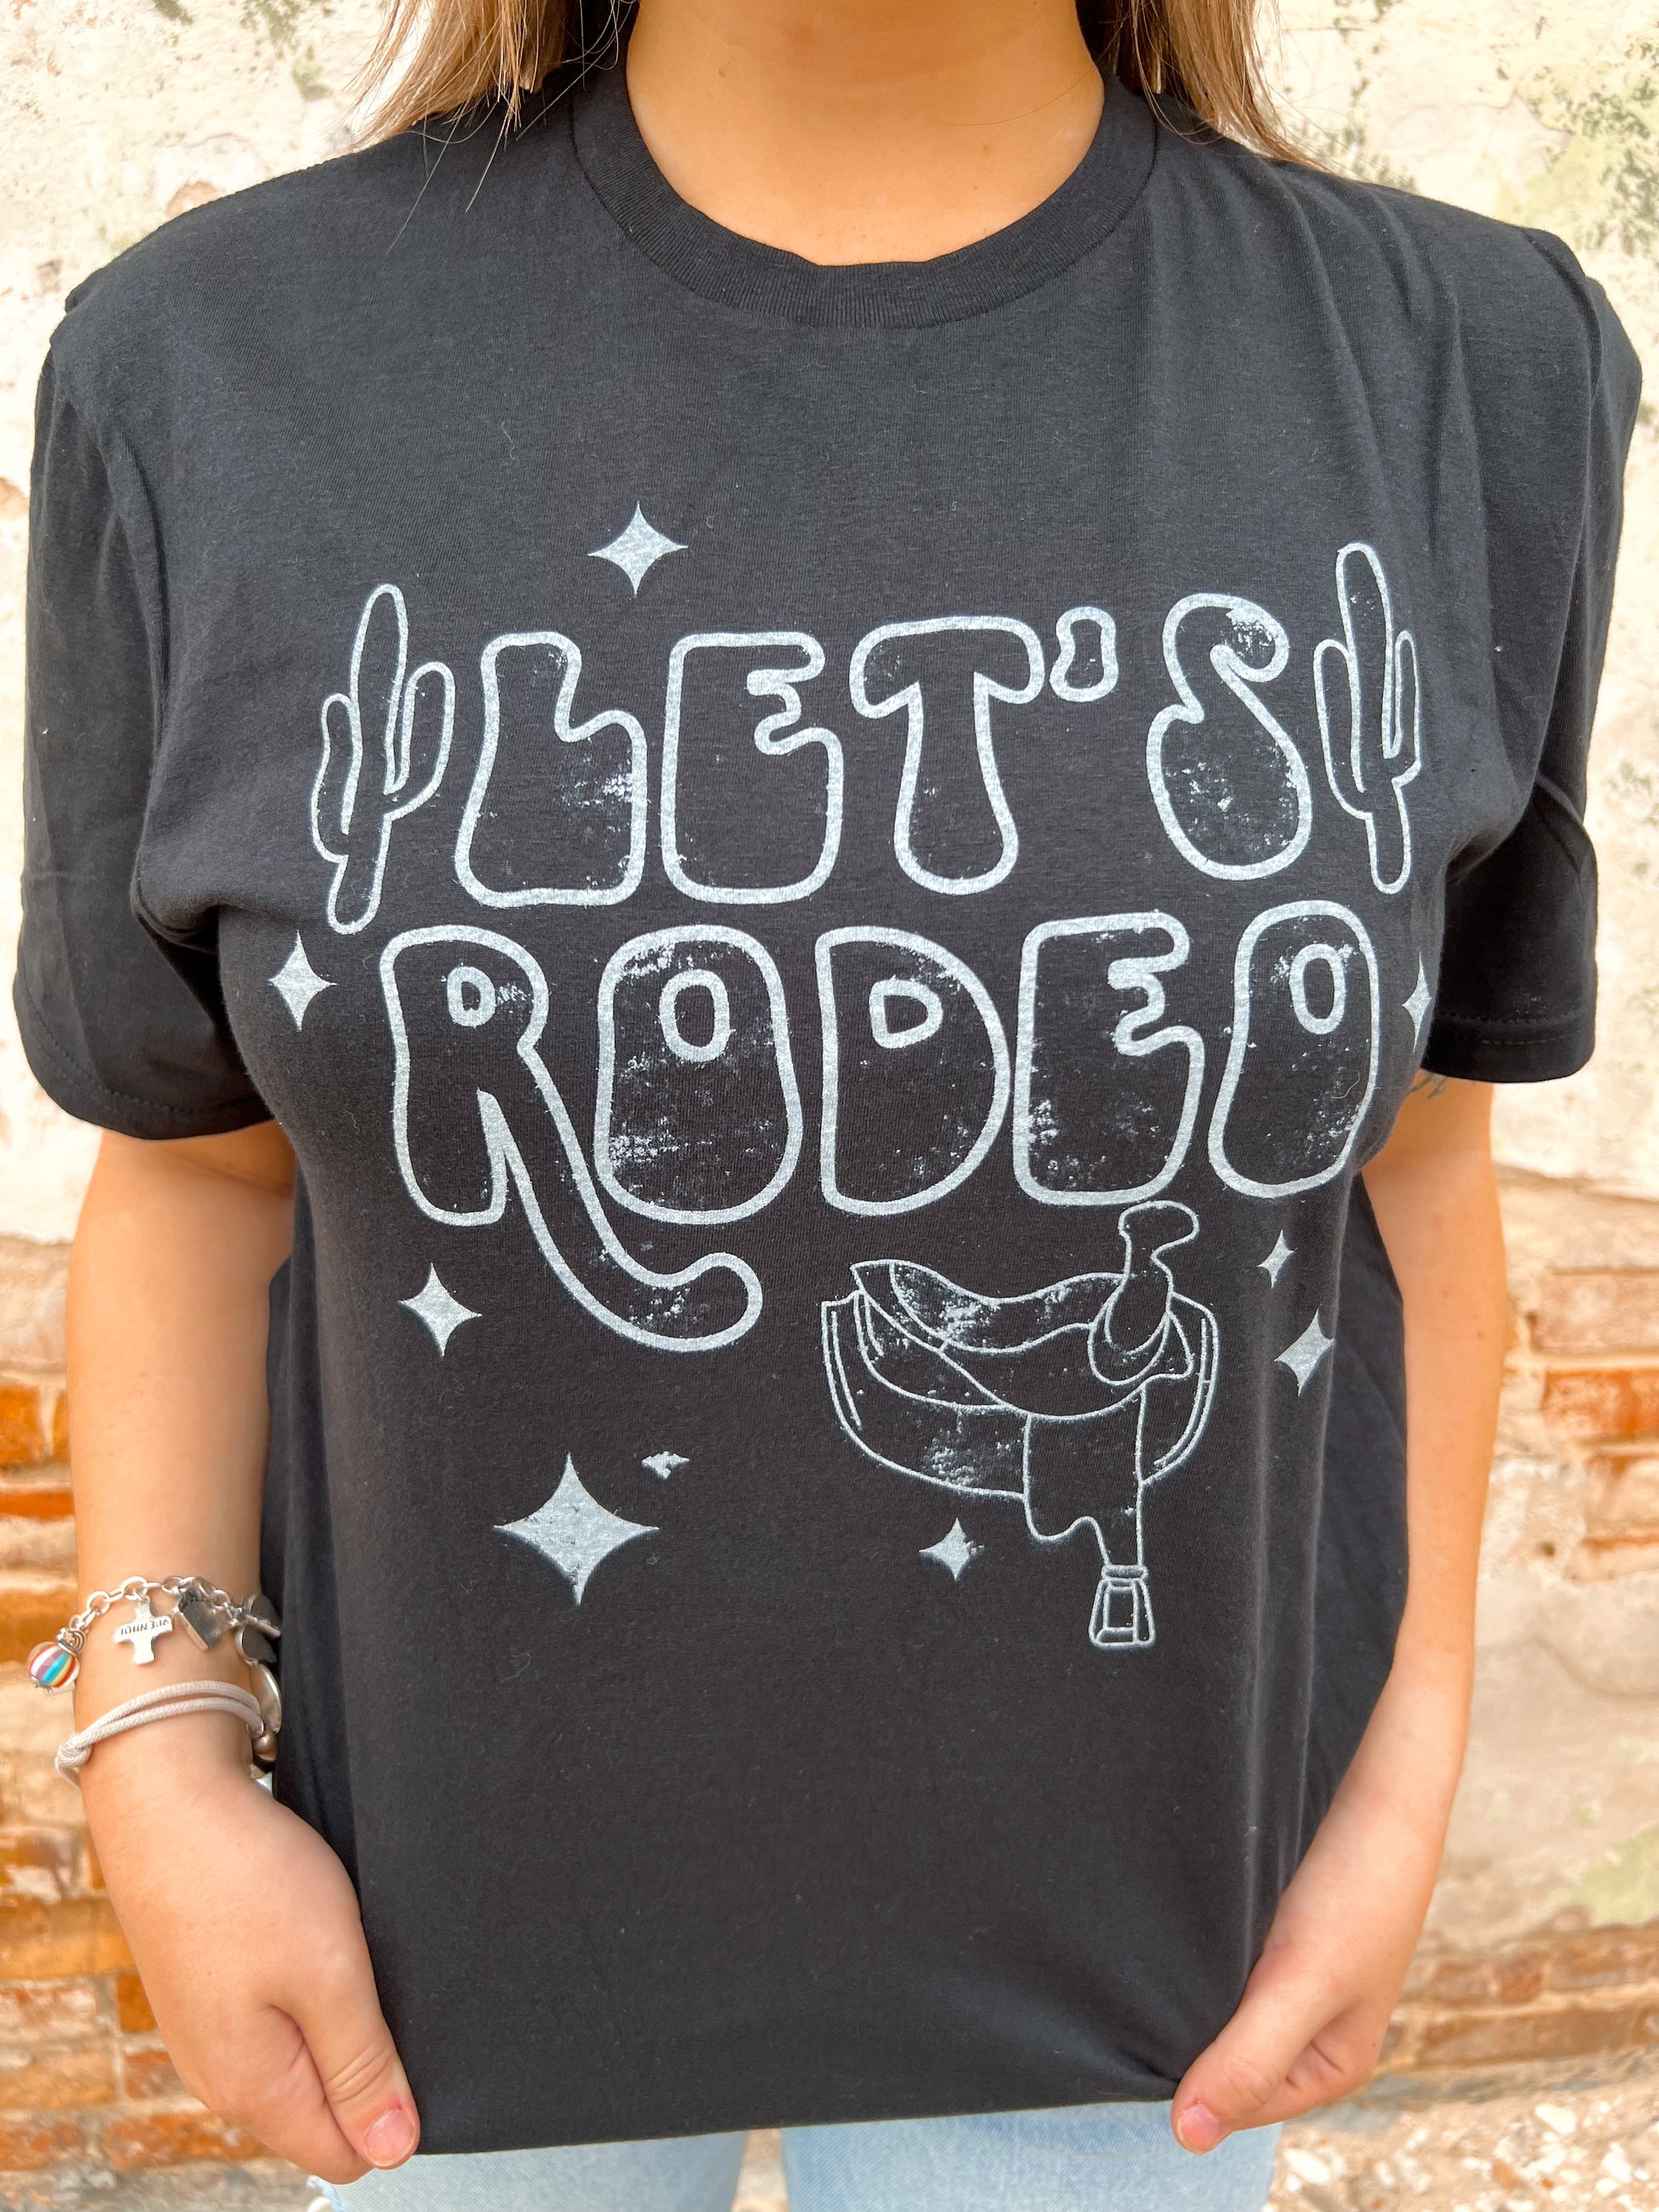 Let's Rodeo with stars and saddle - Black Tee-Top-the lattimore claim-09/12/23, 11/28/23 md, 1st md-The Twisted Chandelier